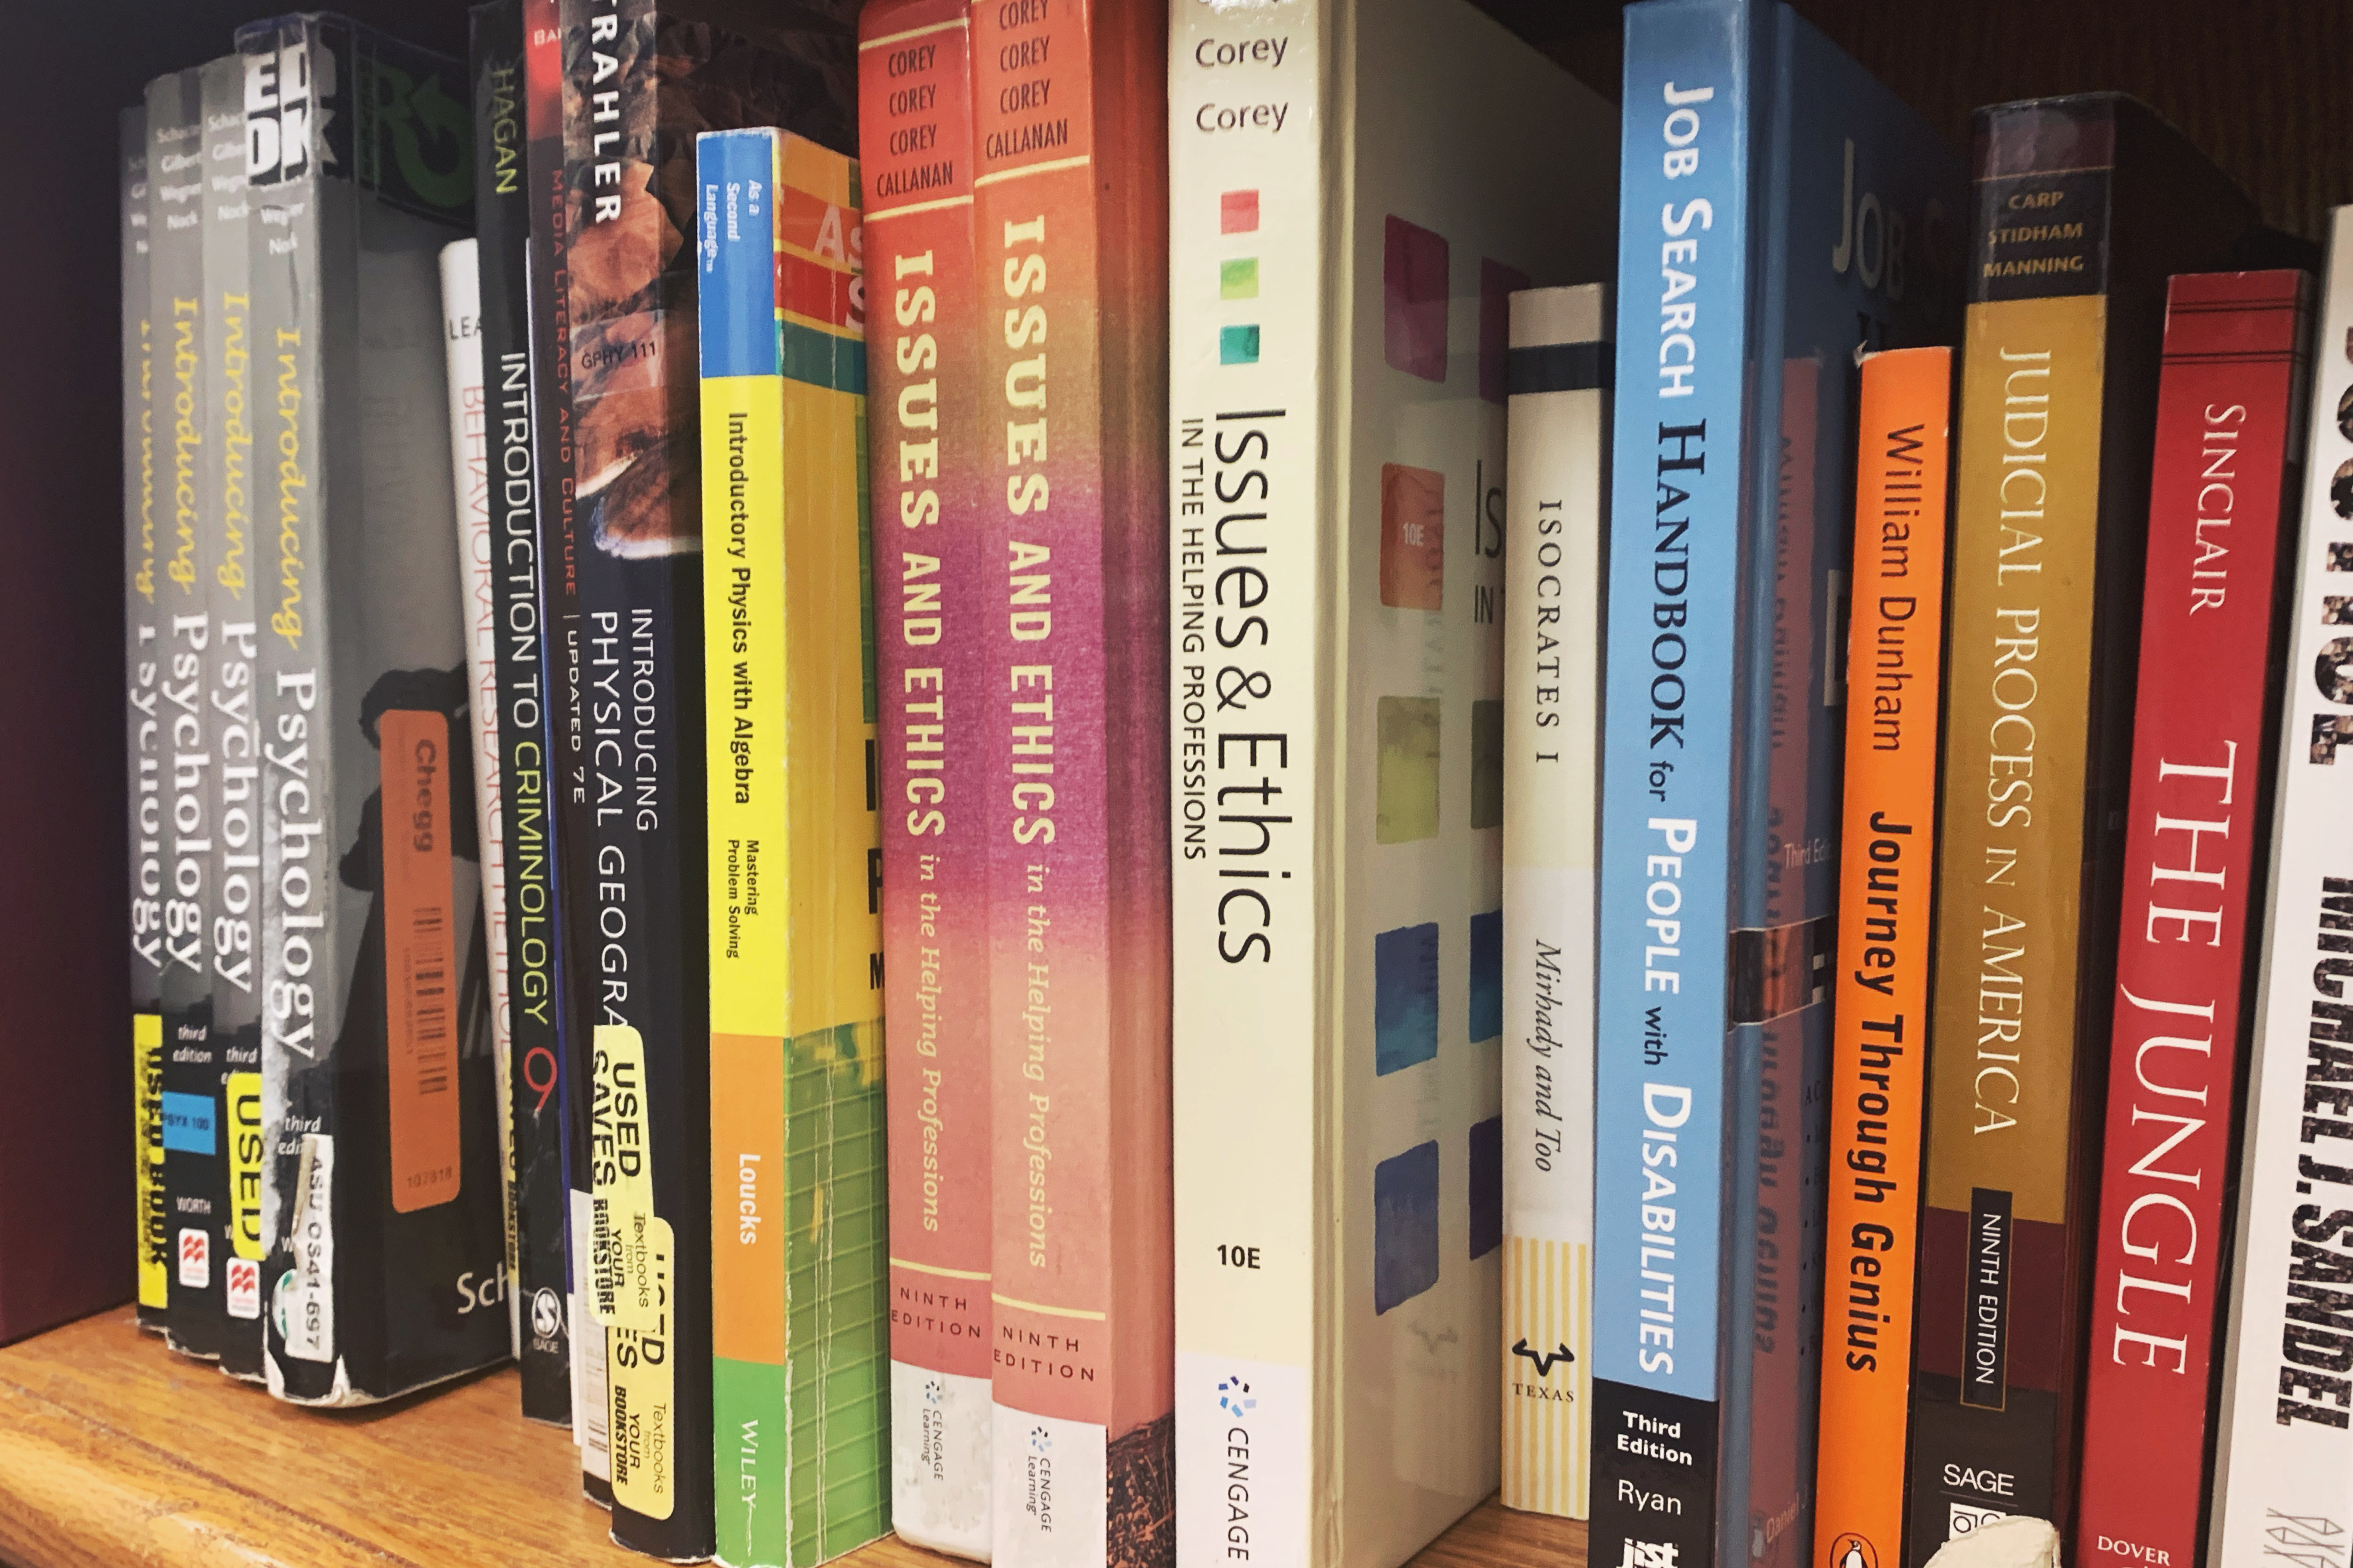 Books on a shelf; titles like "Issues and Ethics" can be seen.